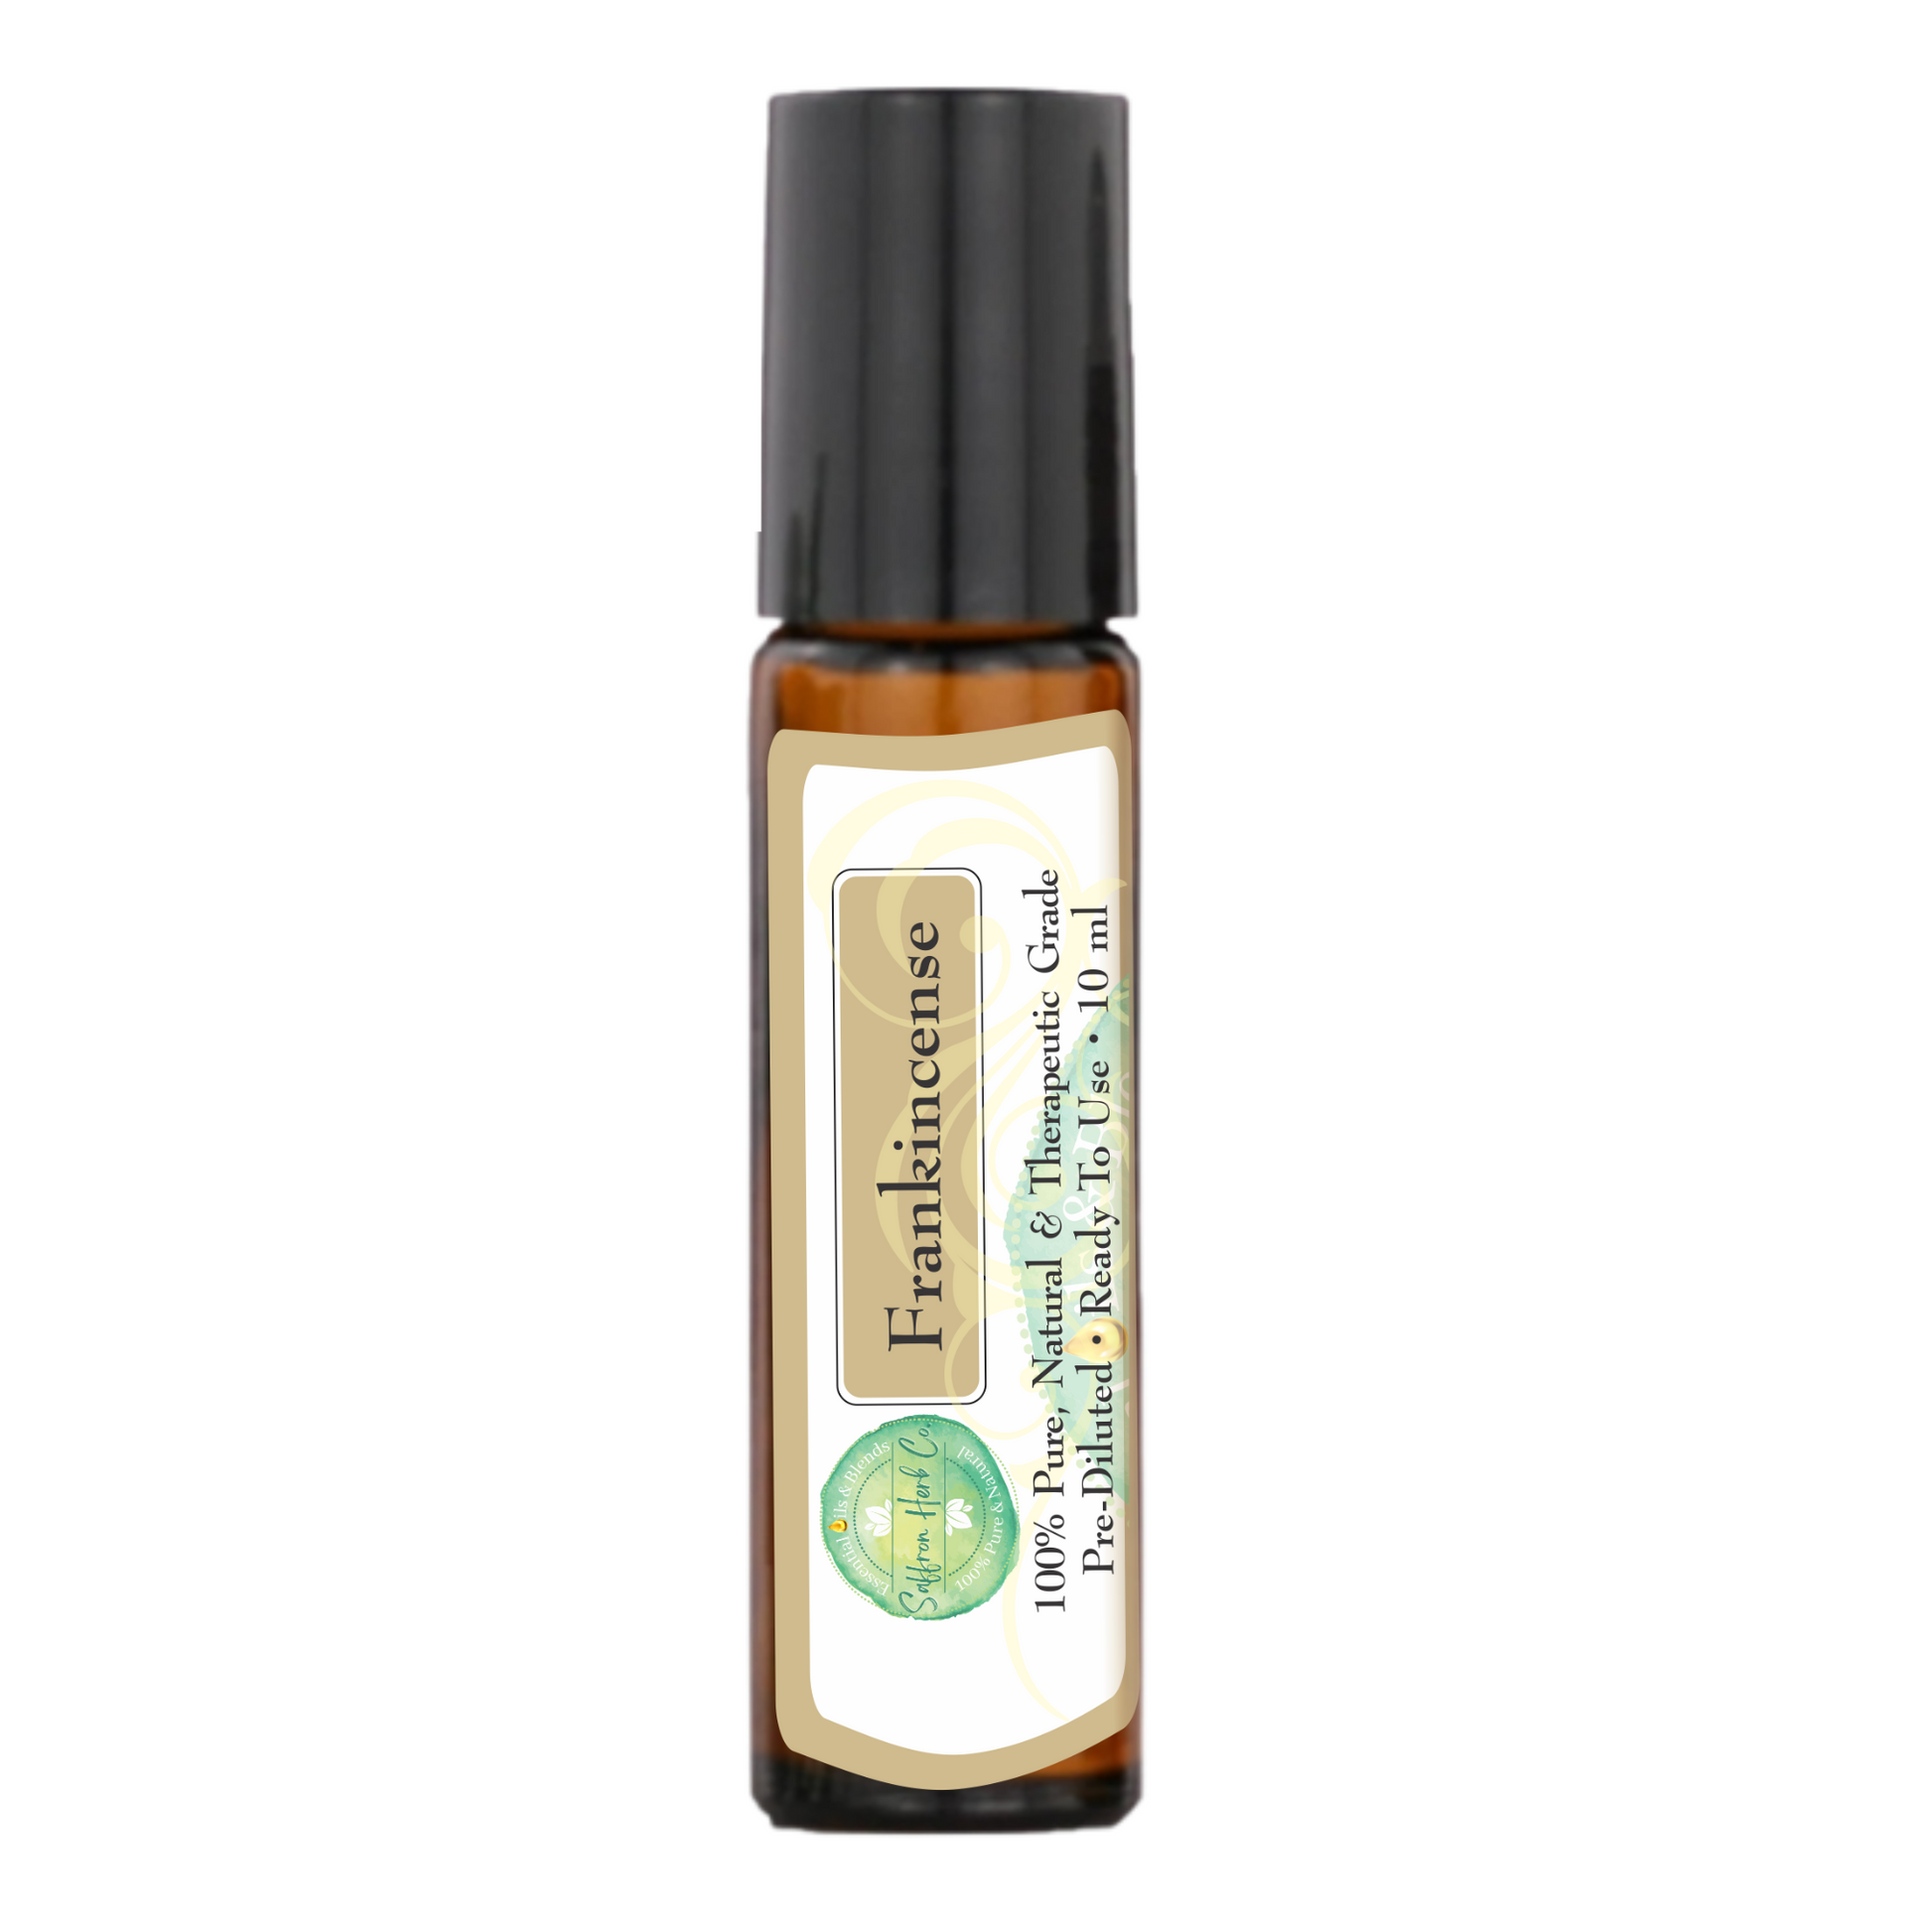 Frankincense 100% Pure Essential Oil 10 ml Oil, Essential Oils Products